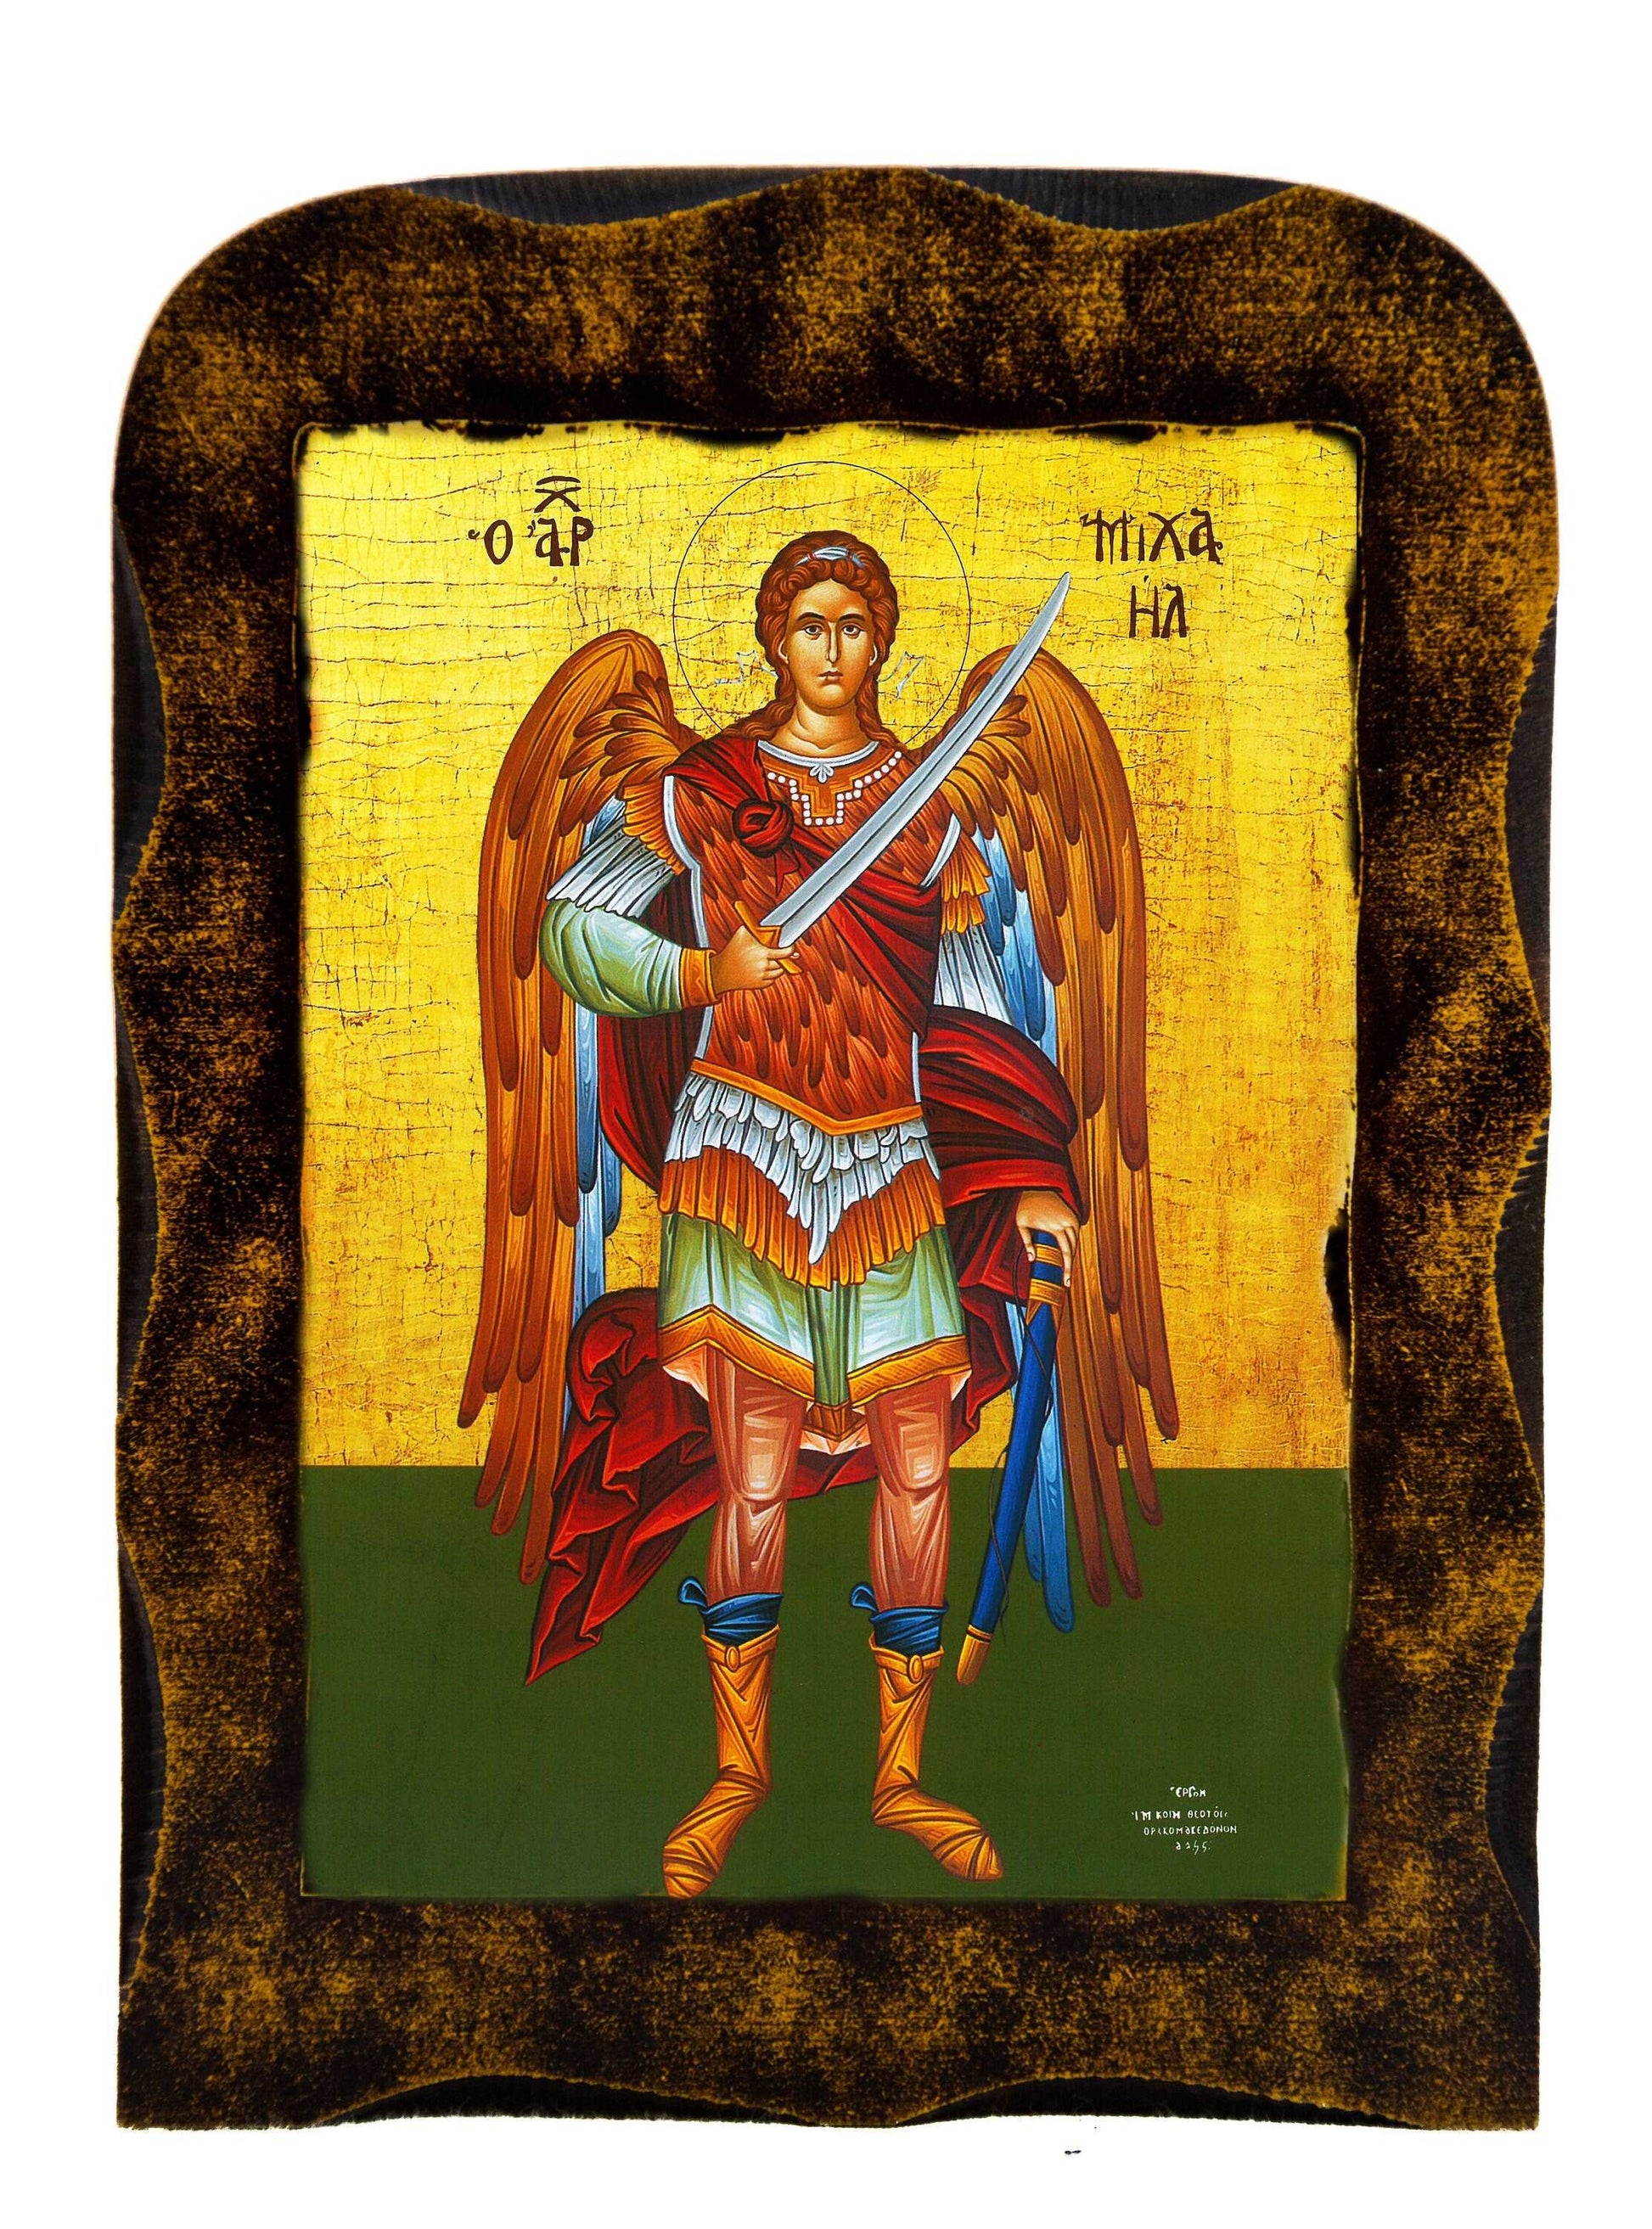 Archangel Michael icon, Handmade Greek Orthodox icon of St Michael, Byzantine art wall hanging on wood plaque religious icon, religious gift TheHolyArt